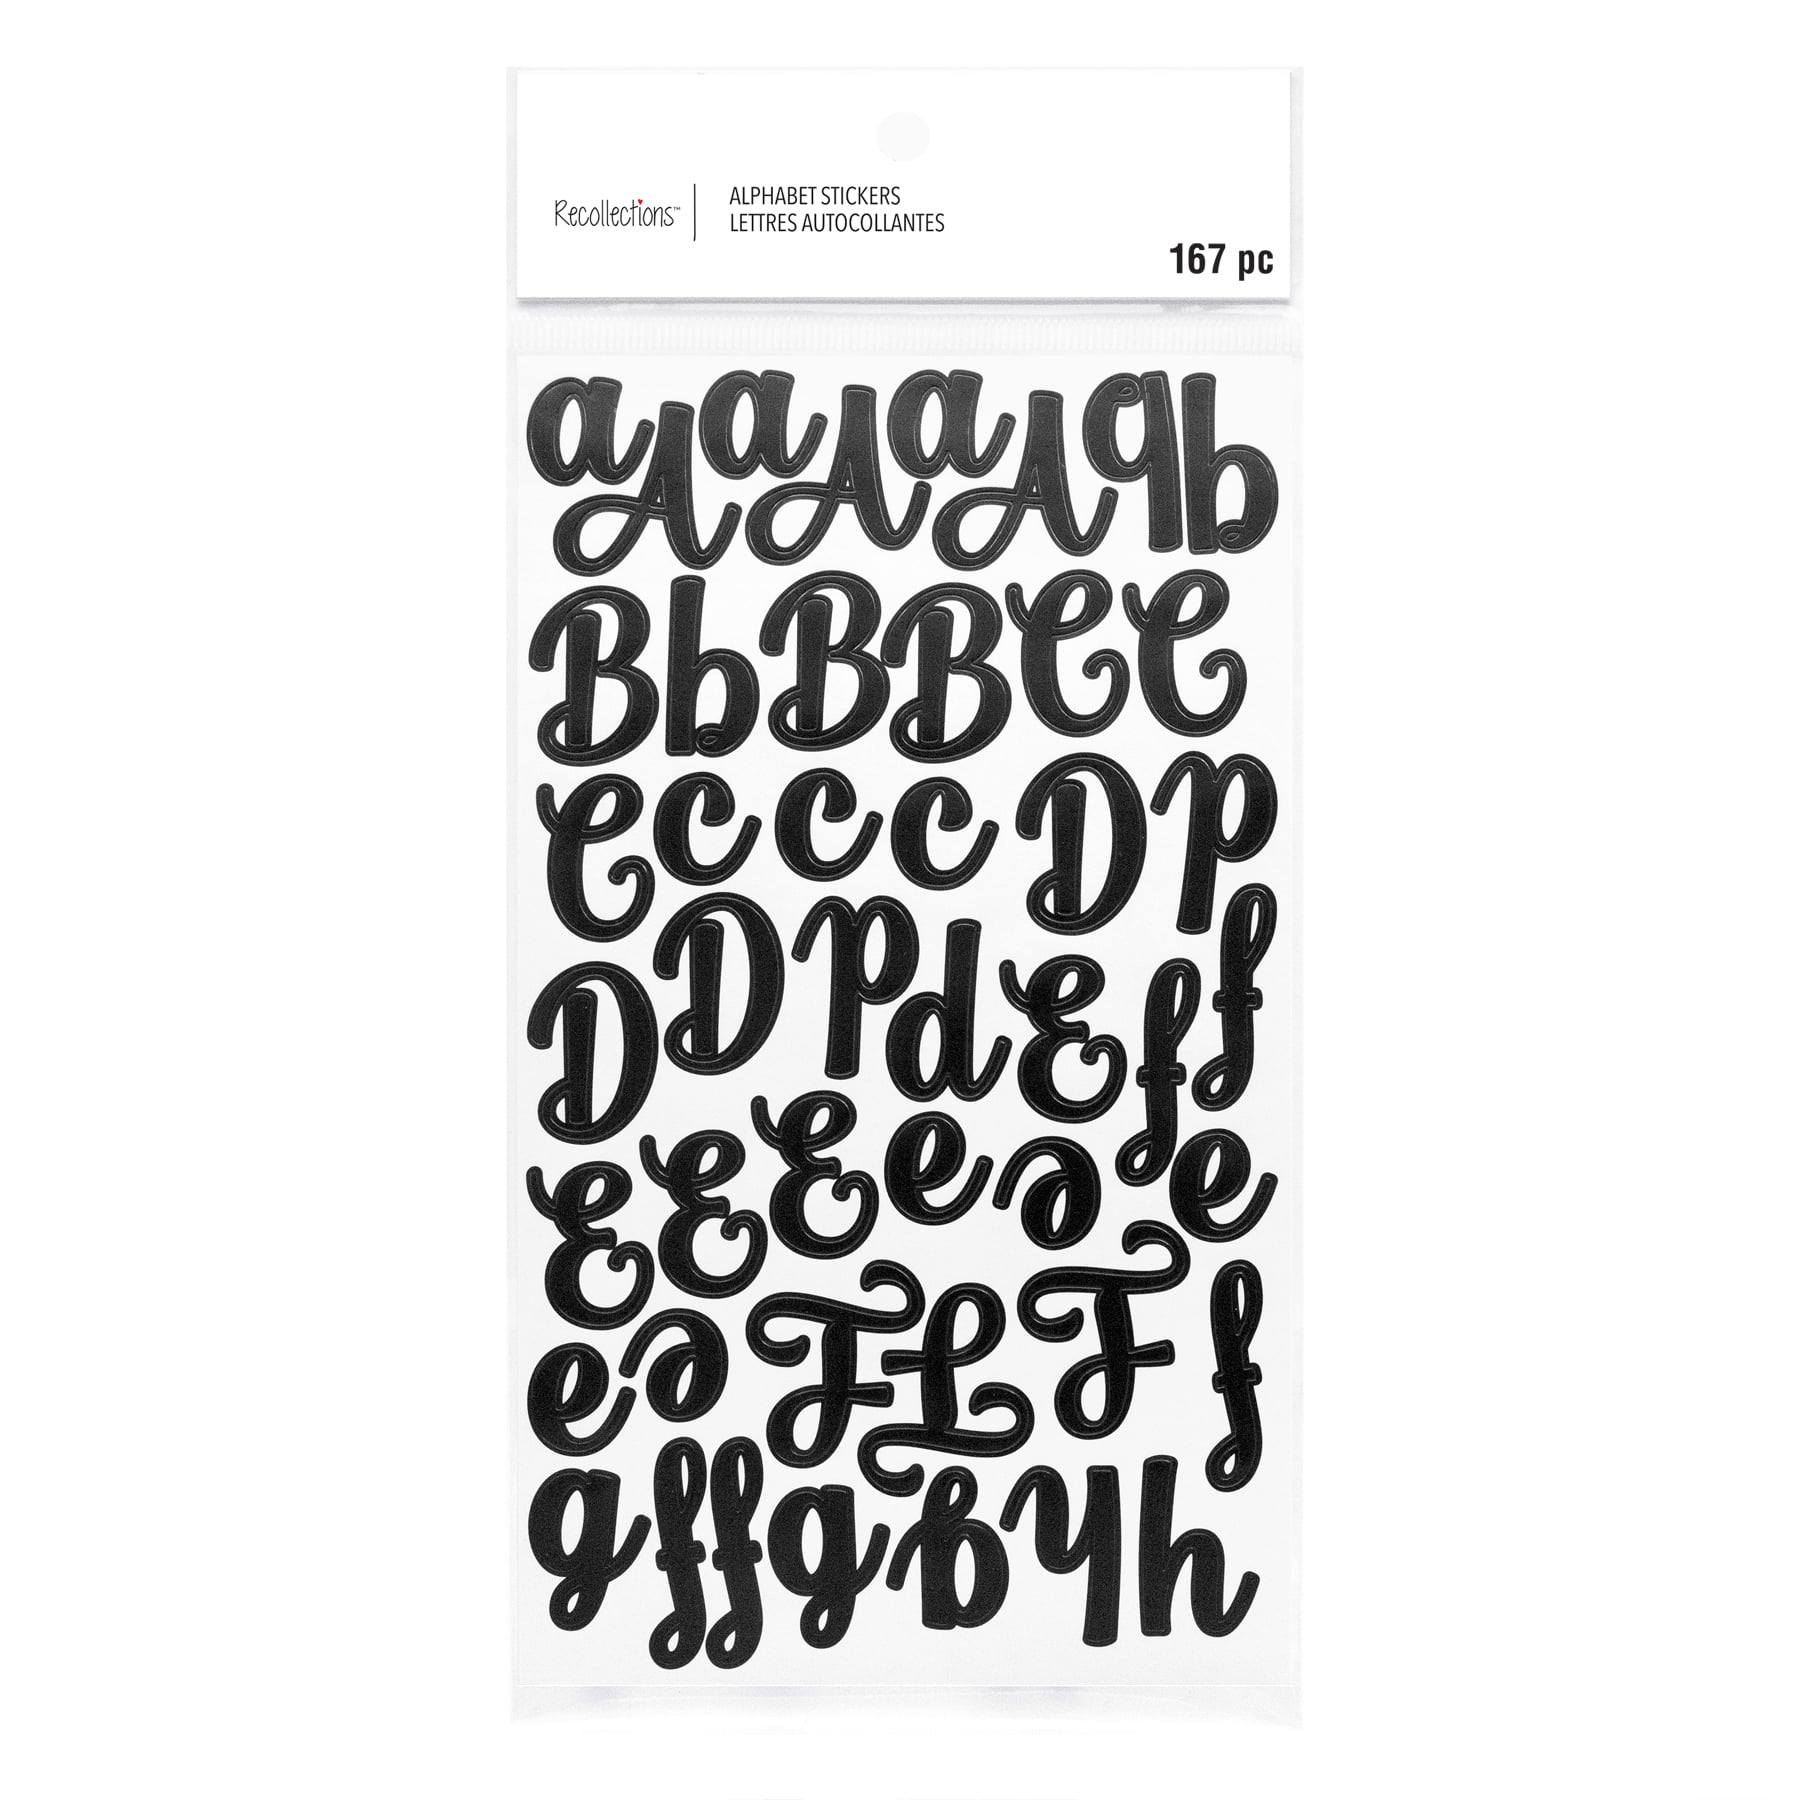 Gold Foil Alphabet Stickers by Recollections™